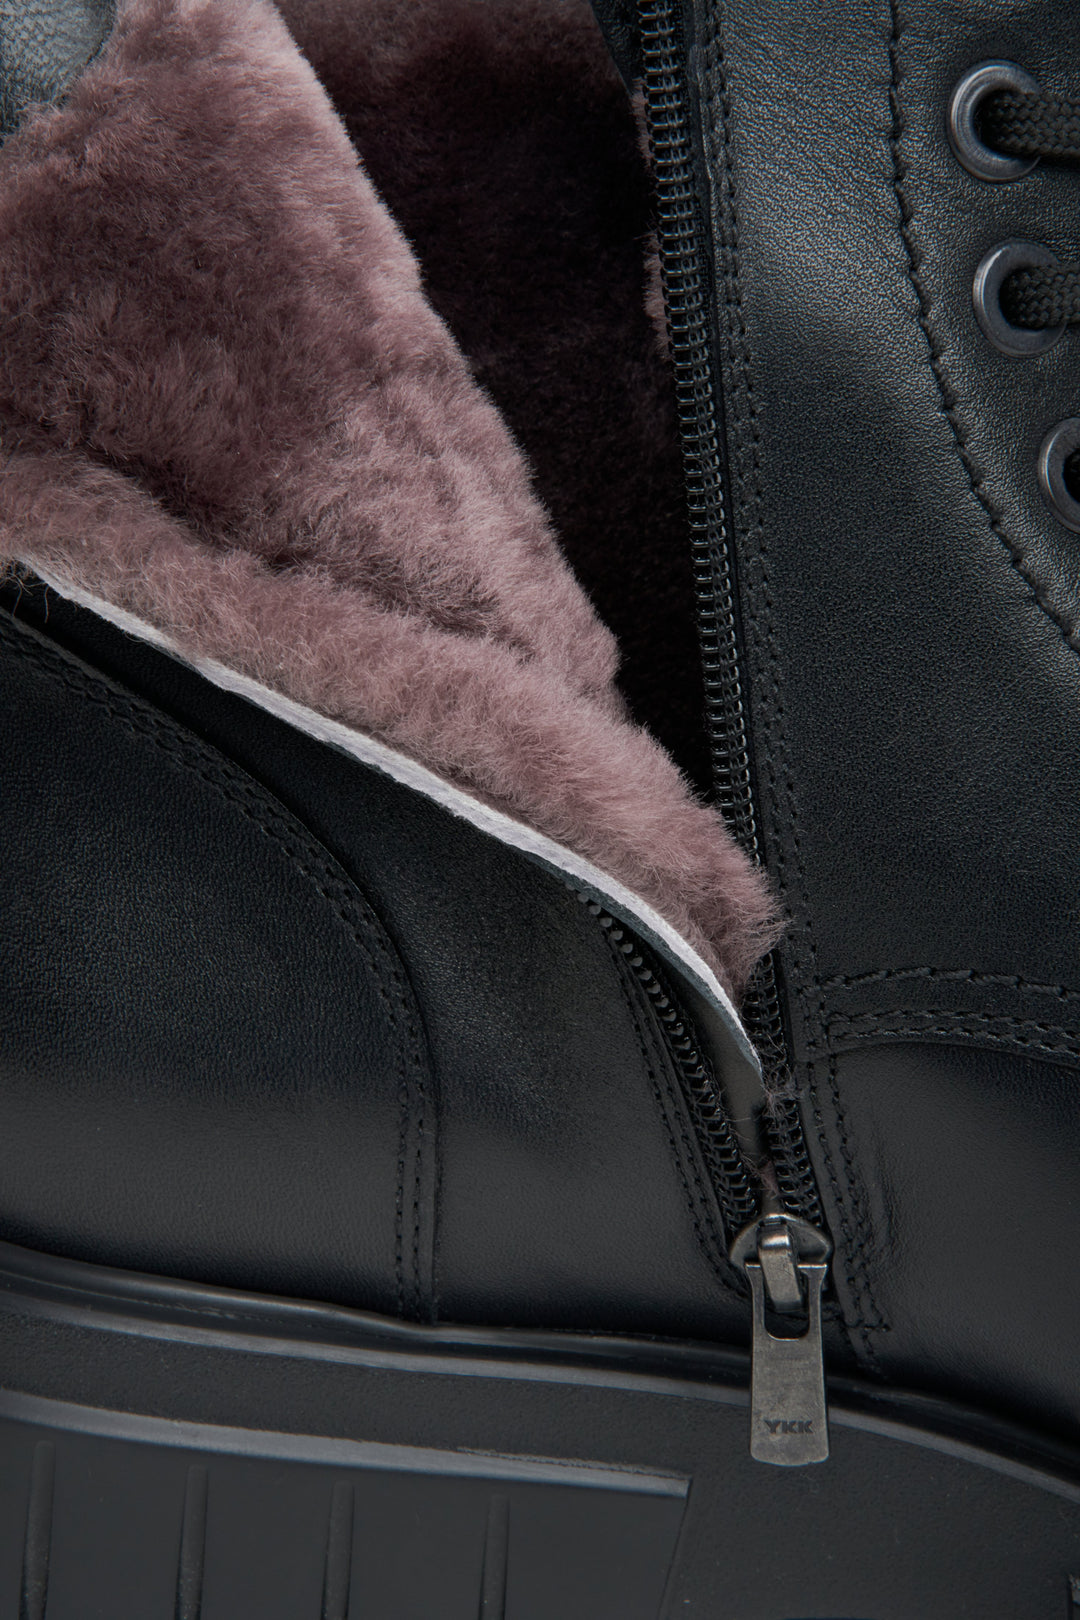 Men's lined black Estro winter ankle boots - close-up on the interior of the shoe.